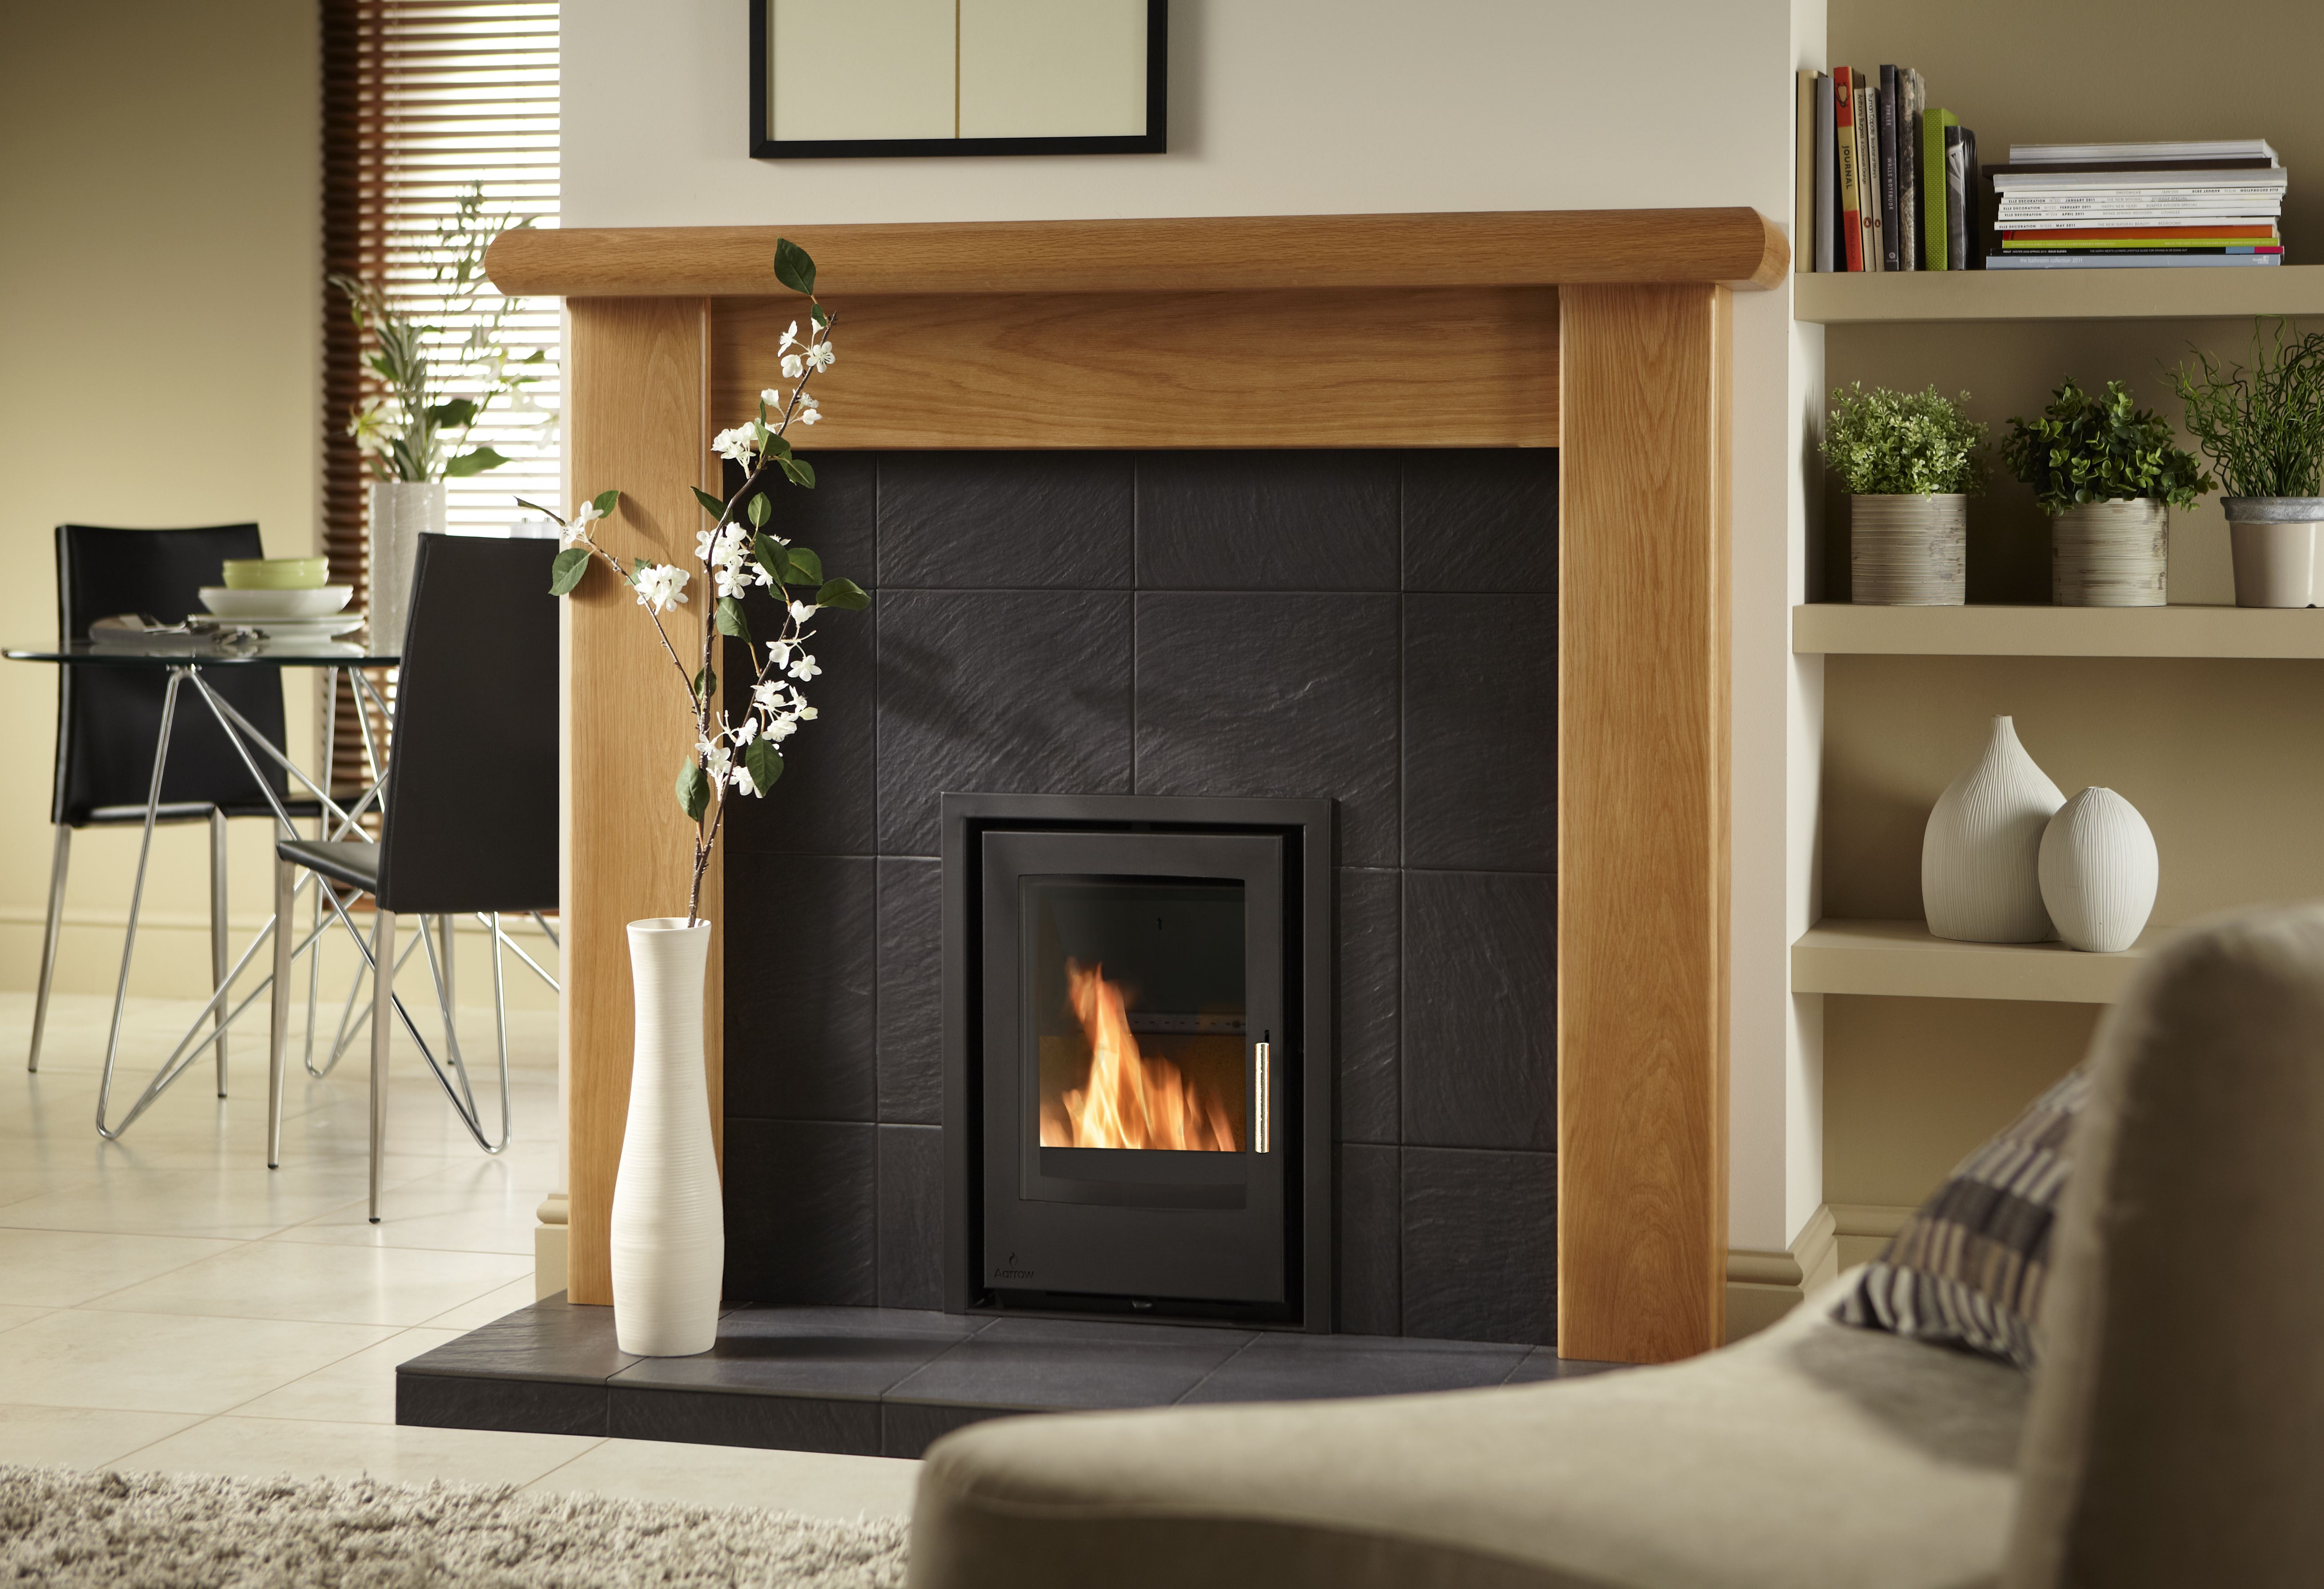 Chesney Fireplace New the Newly Improved Sleek and Cutting Edge Design Of the I